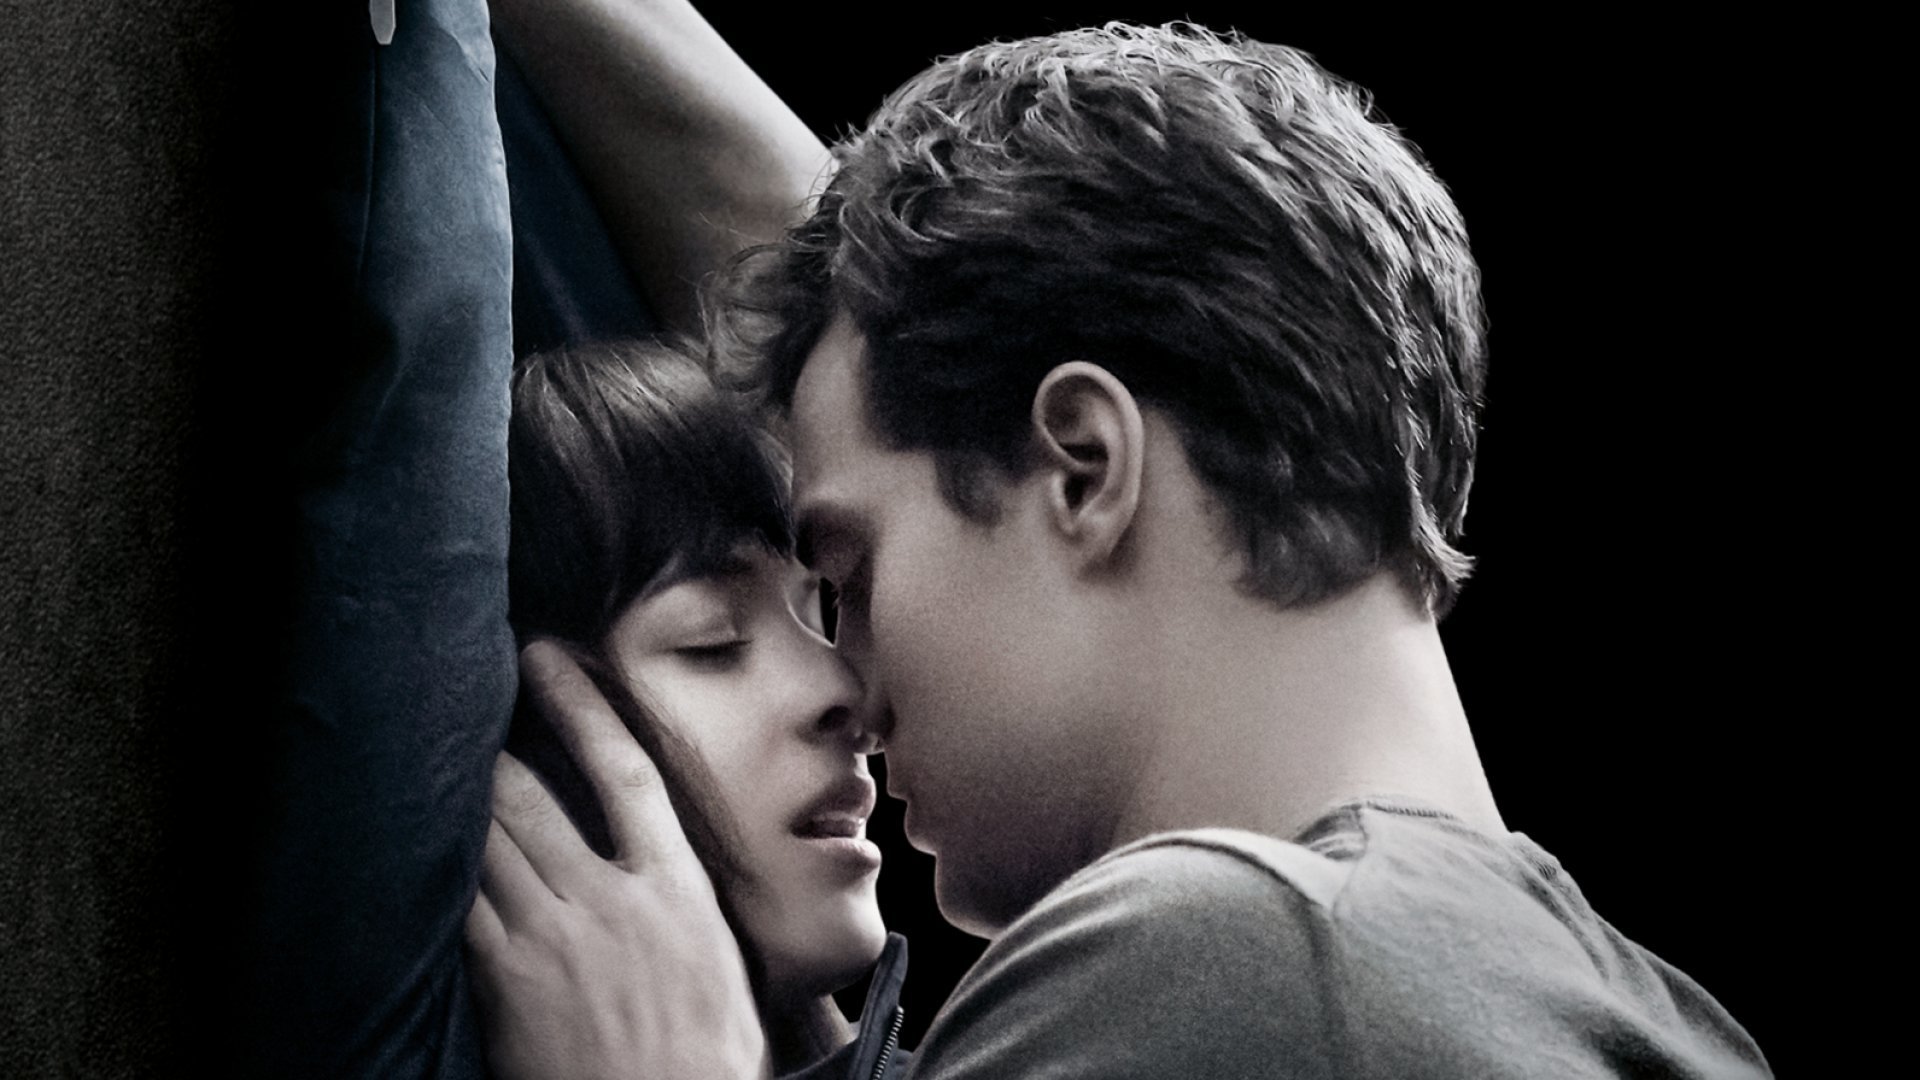 dianne babineau recommends where to stream 50 shades pic